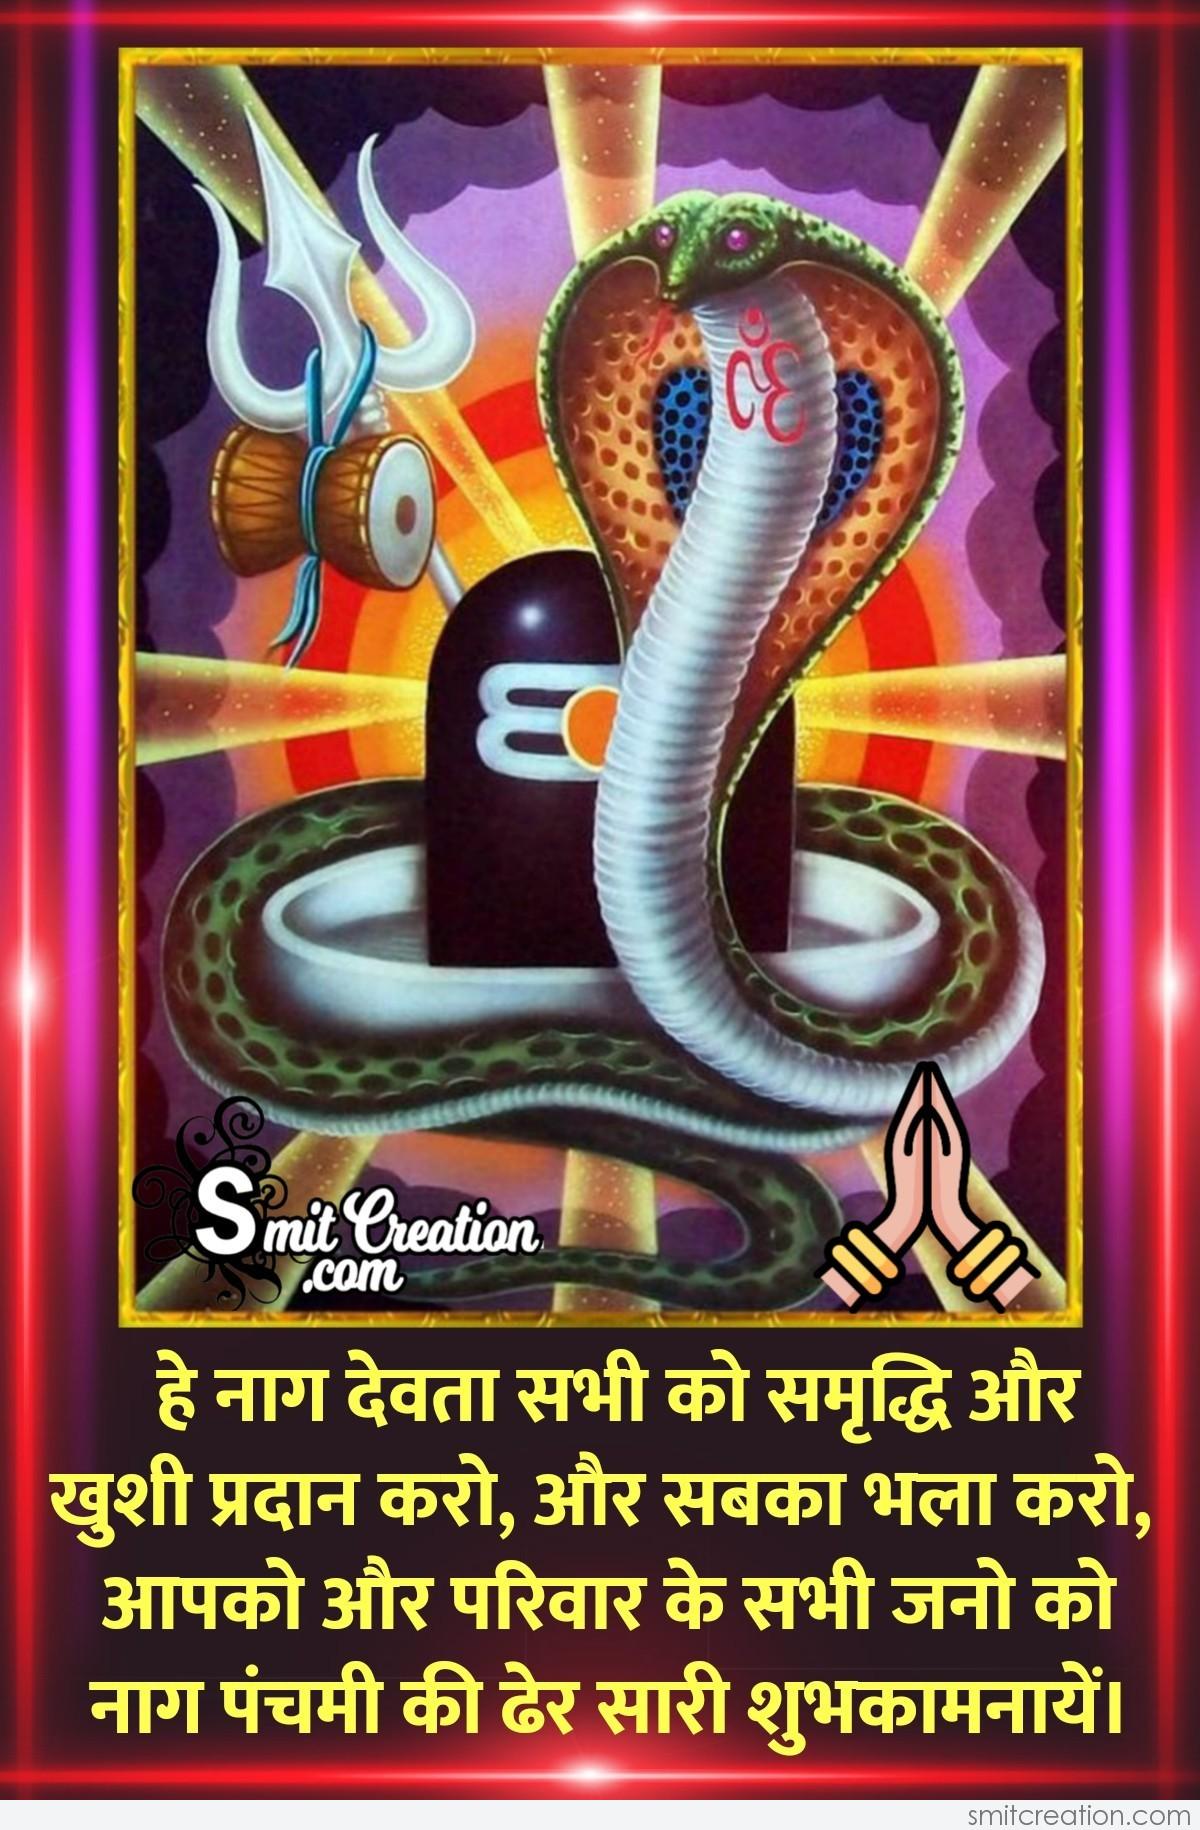 30 Nag Panchami Hindi Pictures And Graphics For Different Festivals